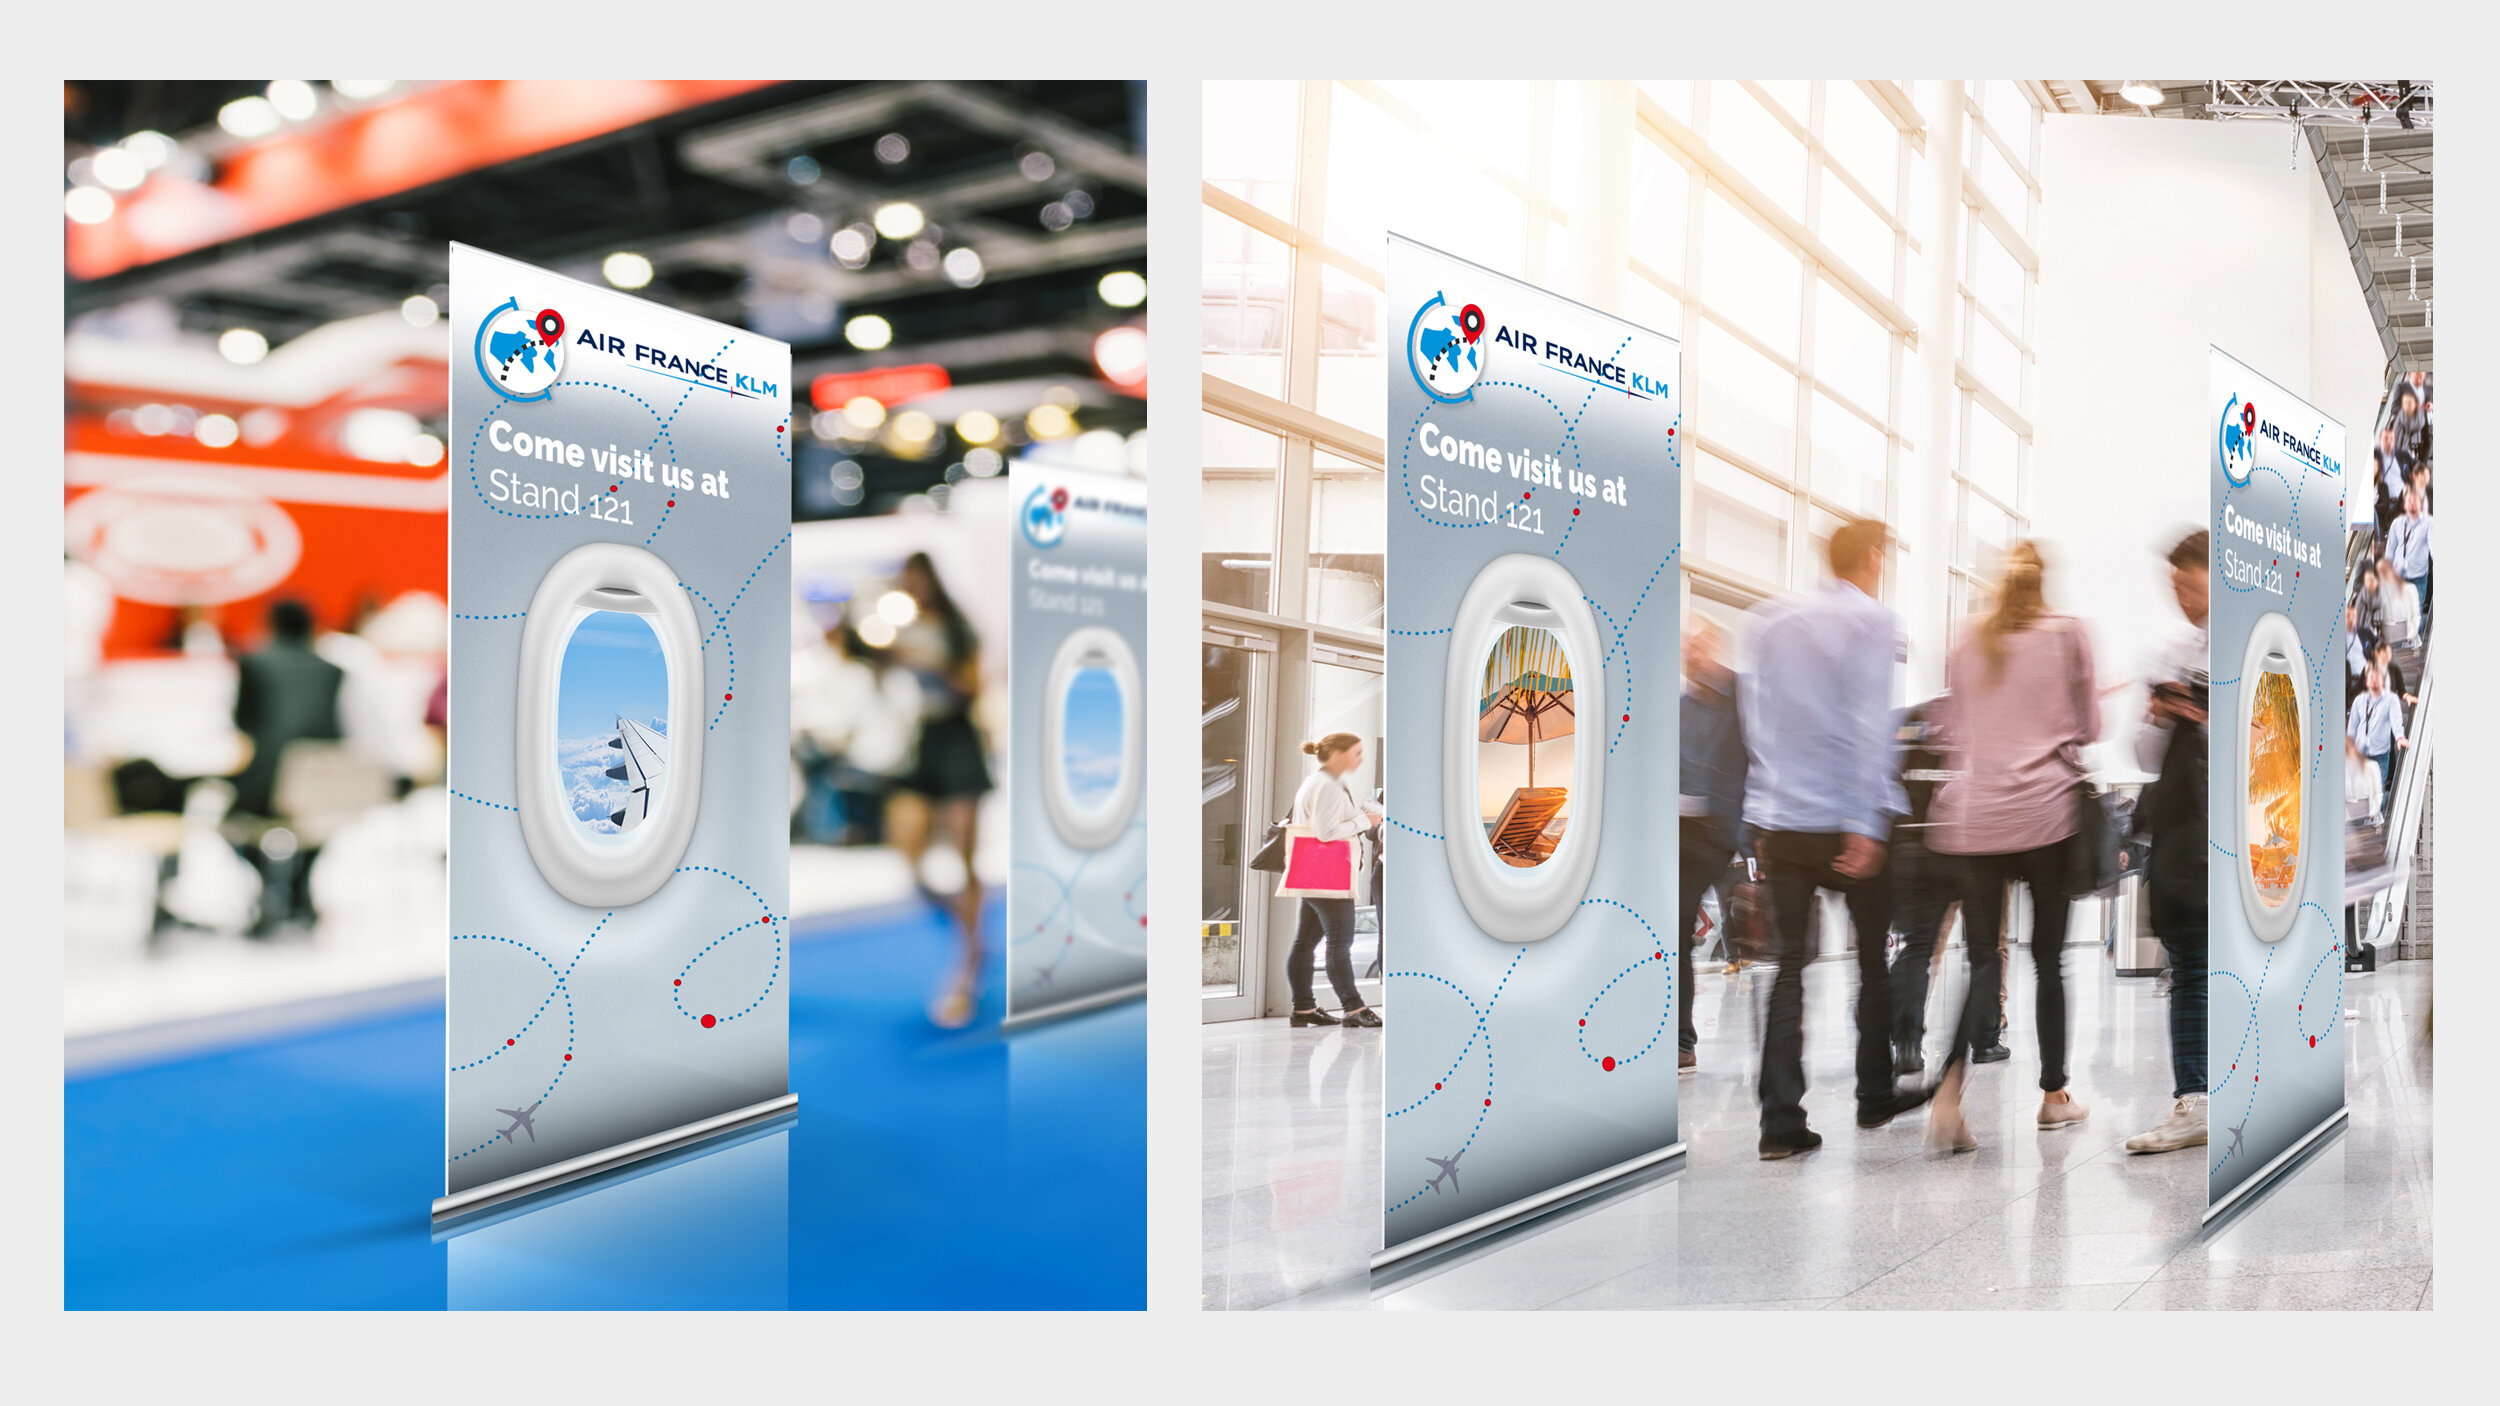 18-212. Air France KLM The Journey 2018_banners 01.jpg